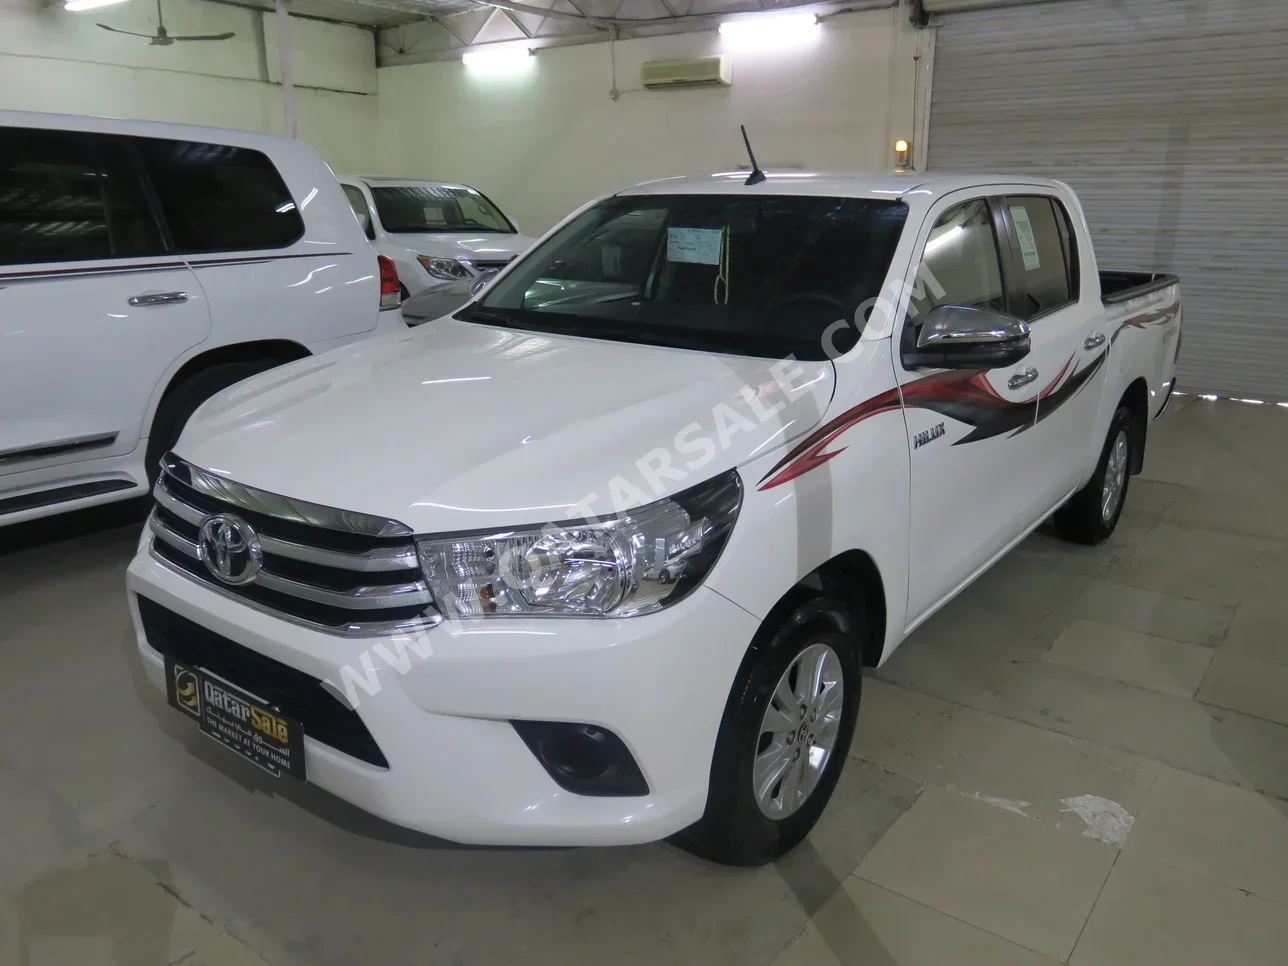 Toyota  Hilux  2023  Automatic  19,000 Km  4 Cylinder  Four Wheel Drive (4WD)  Pick Up  White  With Warranty